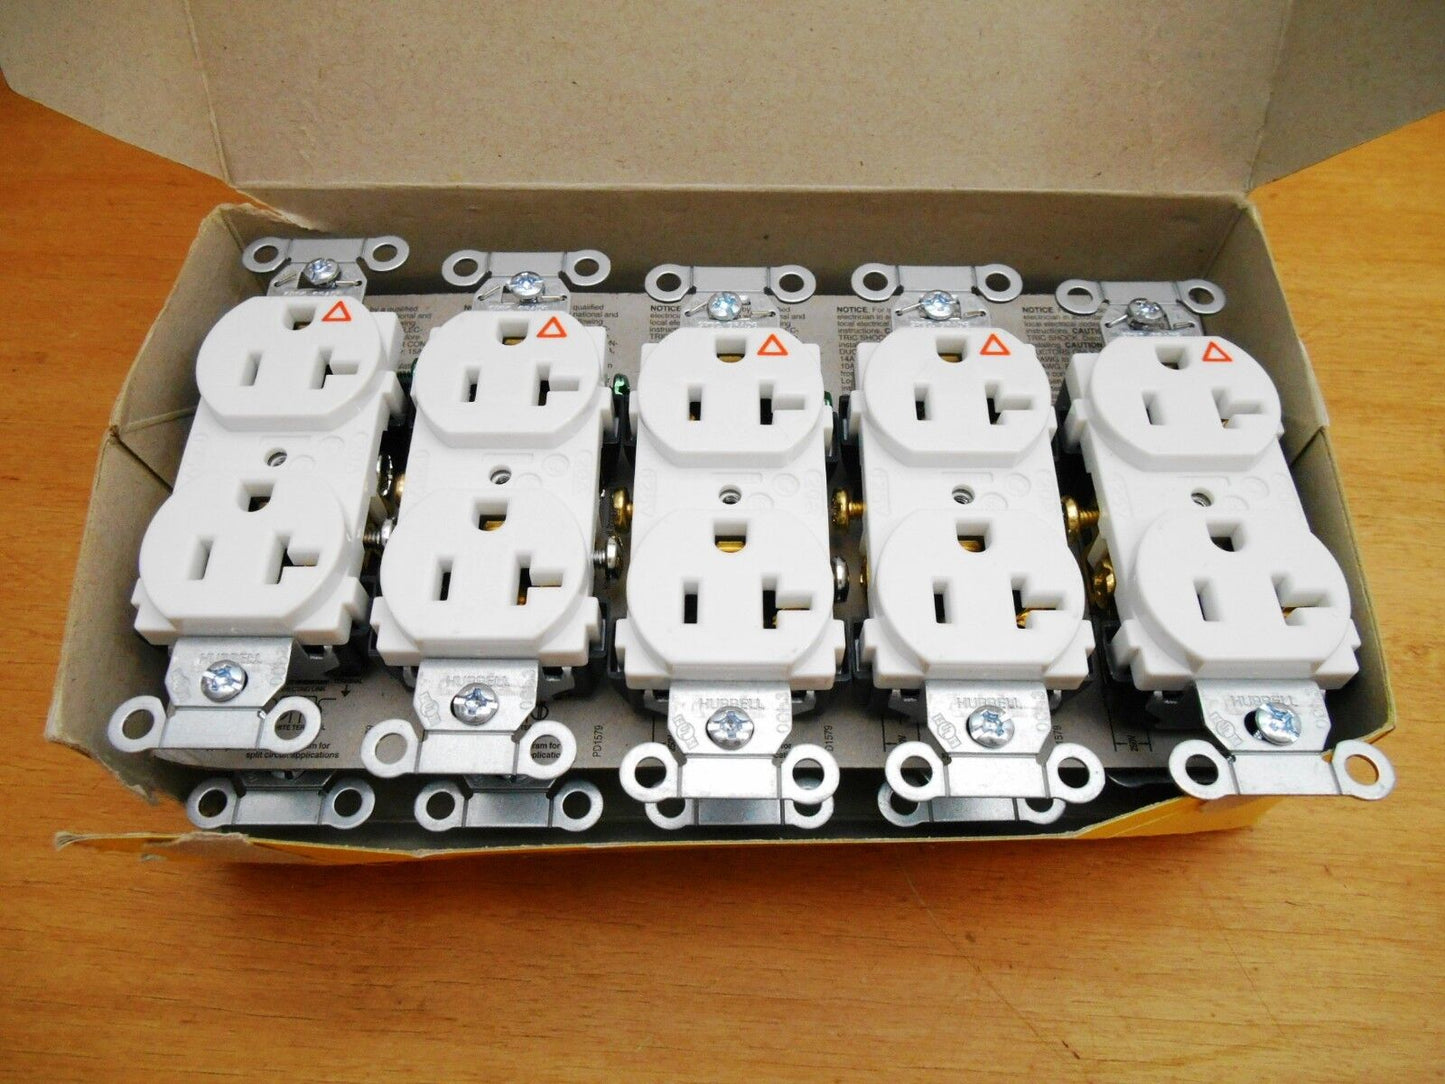 LOT OF 10 HUBBELL IG20CRWHI 20A, 125V, 5-20R, 2P, 3W, 1PH RECEPTACLE WHITE, NEW